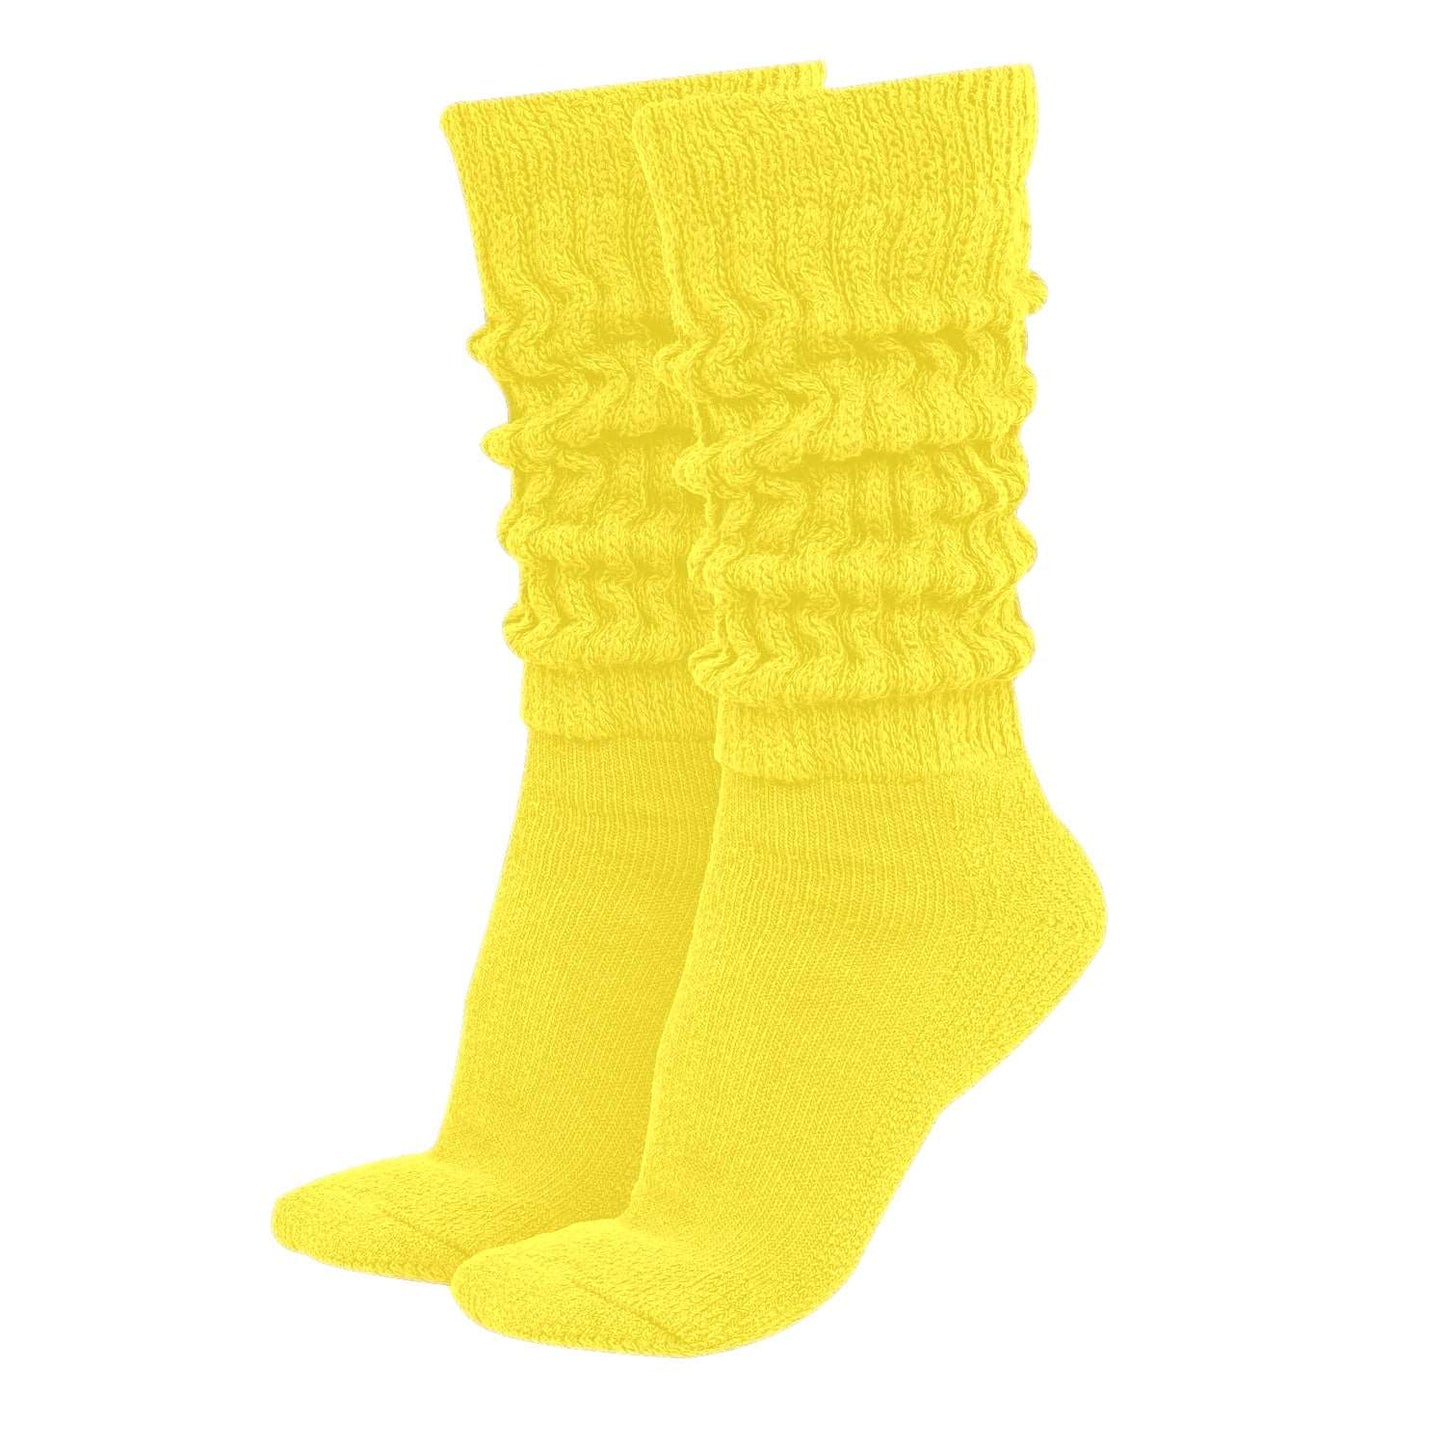 MDR Women's Extra Long Heavy Slouch Cotton Socks Made in USA 1 Pair Size 9 to 11 (Yellow)